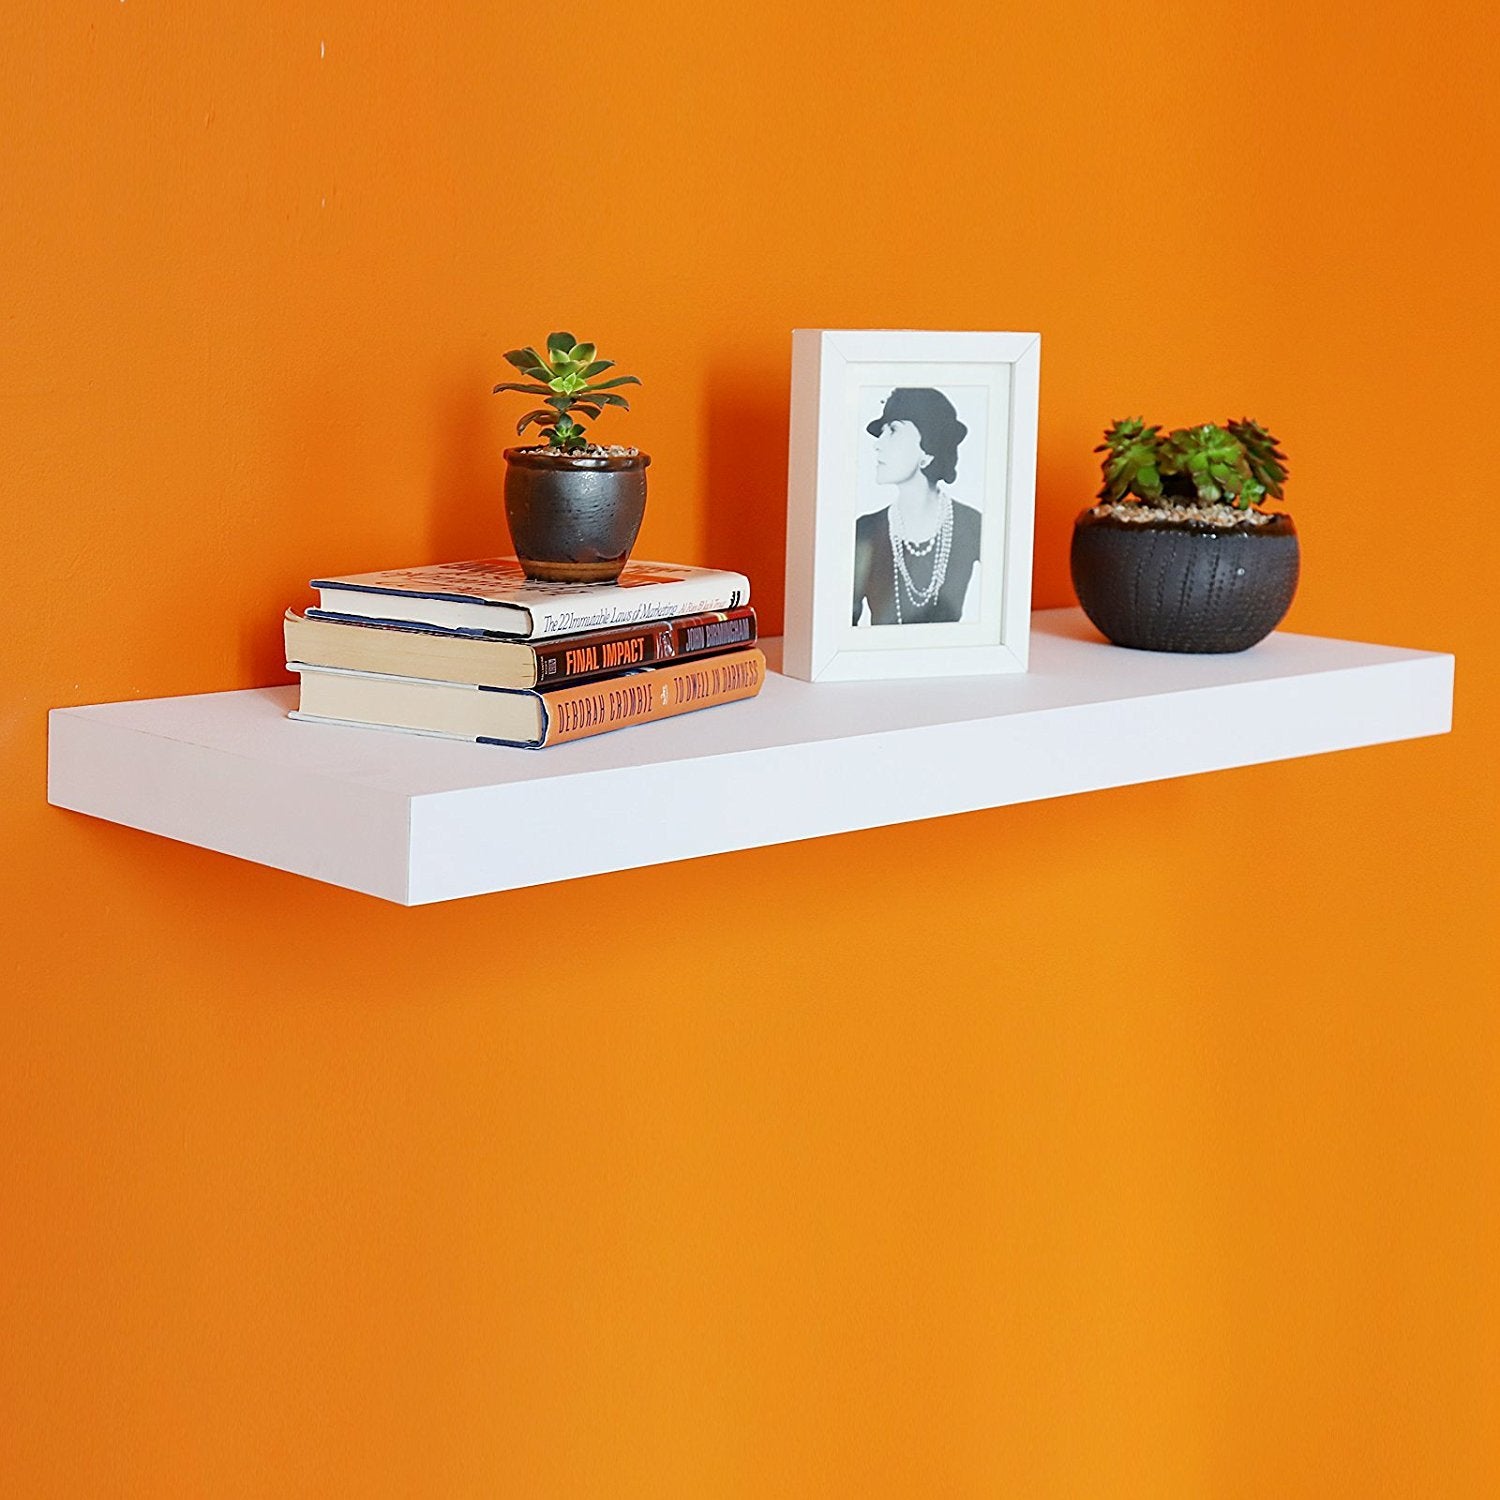 12 Inch Deep Grande Floating Wall Shelves | Deeper Than Others